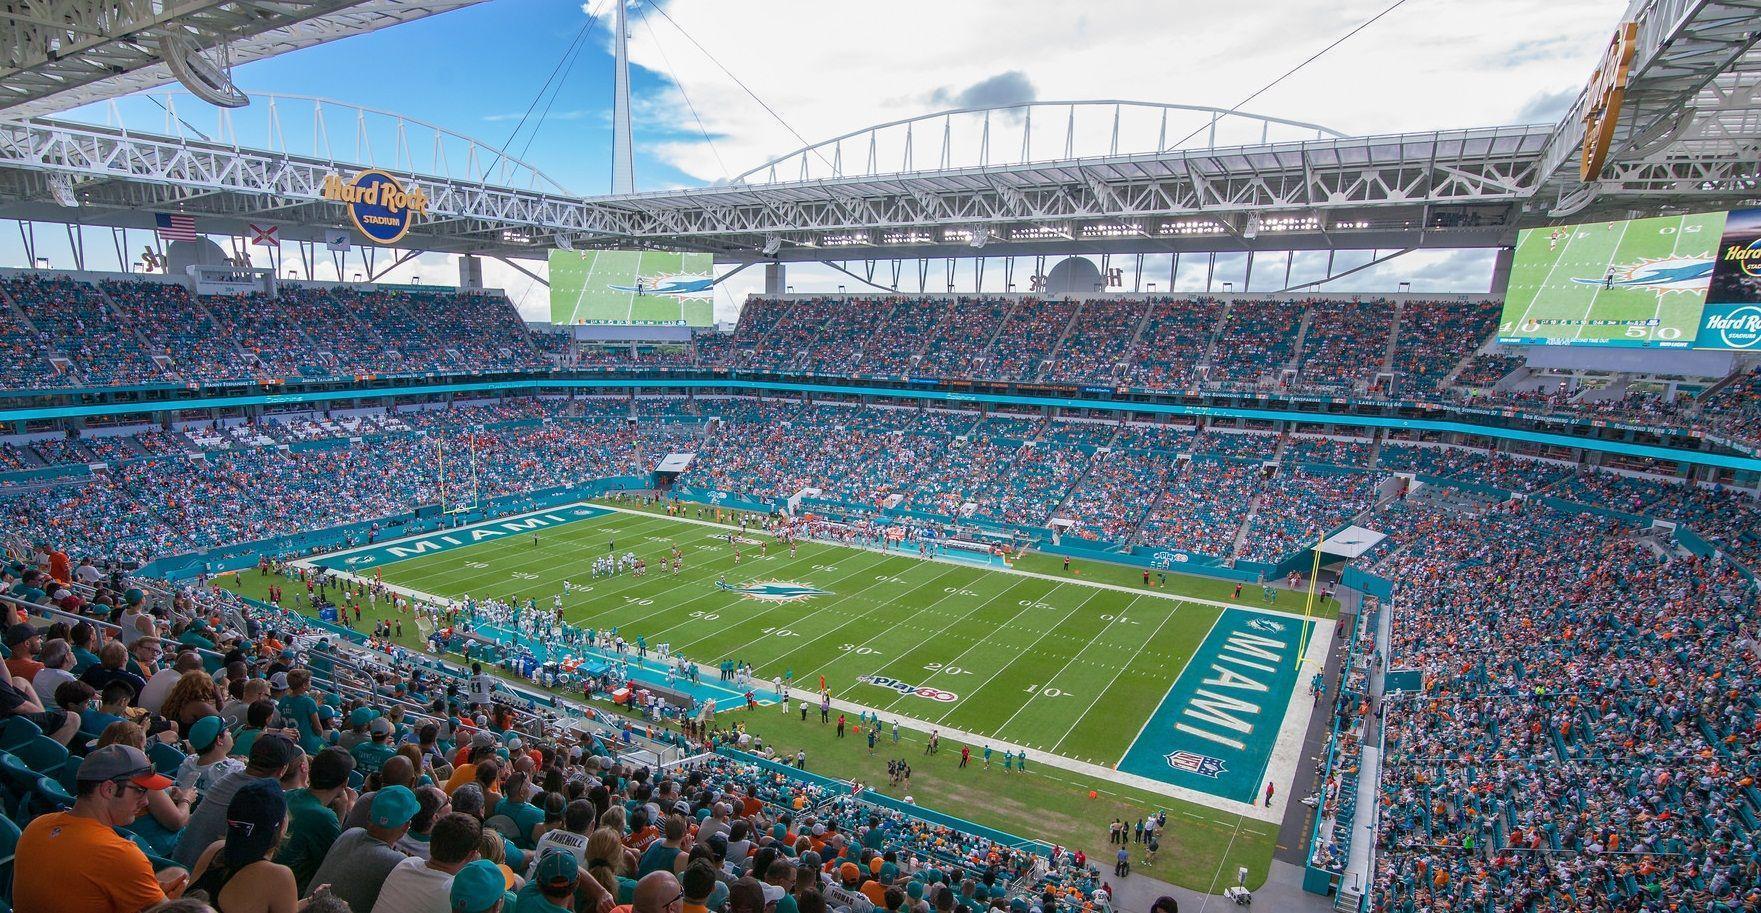 miami dolphins play by play online